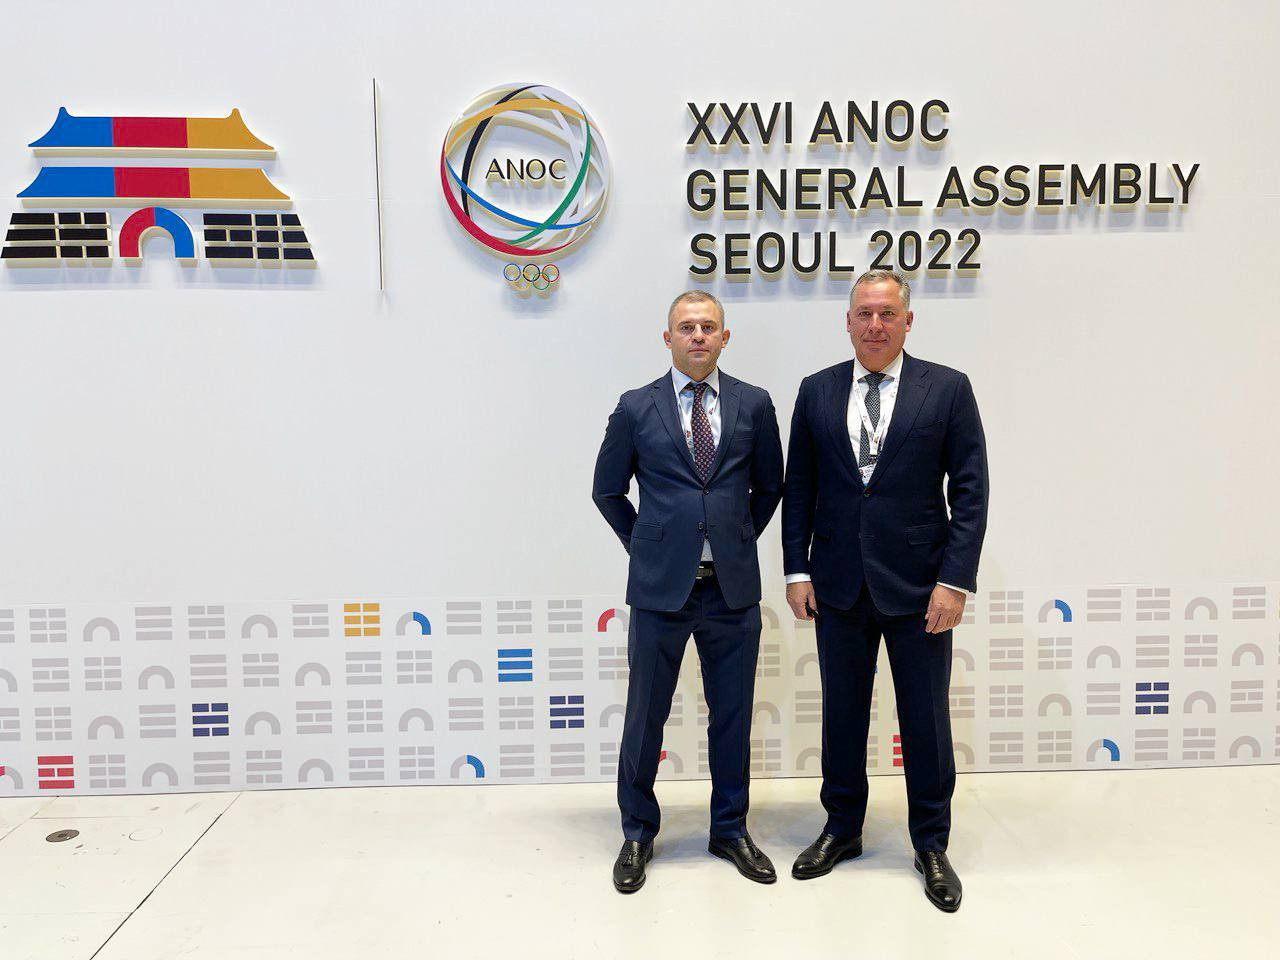 The presence at the ANOC General Assembly of the Russian Olympic Committee, led by its President Stanislav Pozdnyakov, has proved controversial ©ROC